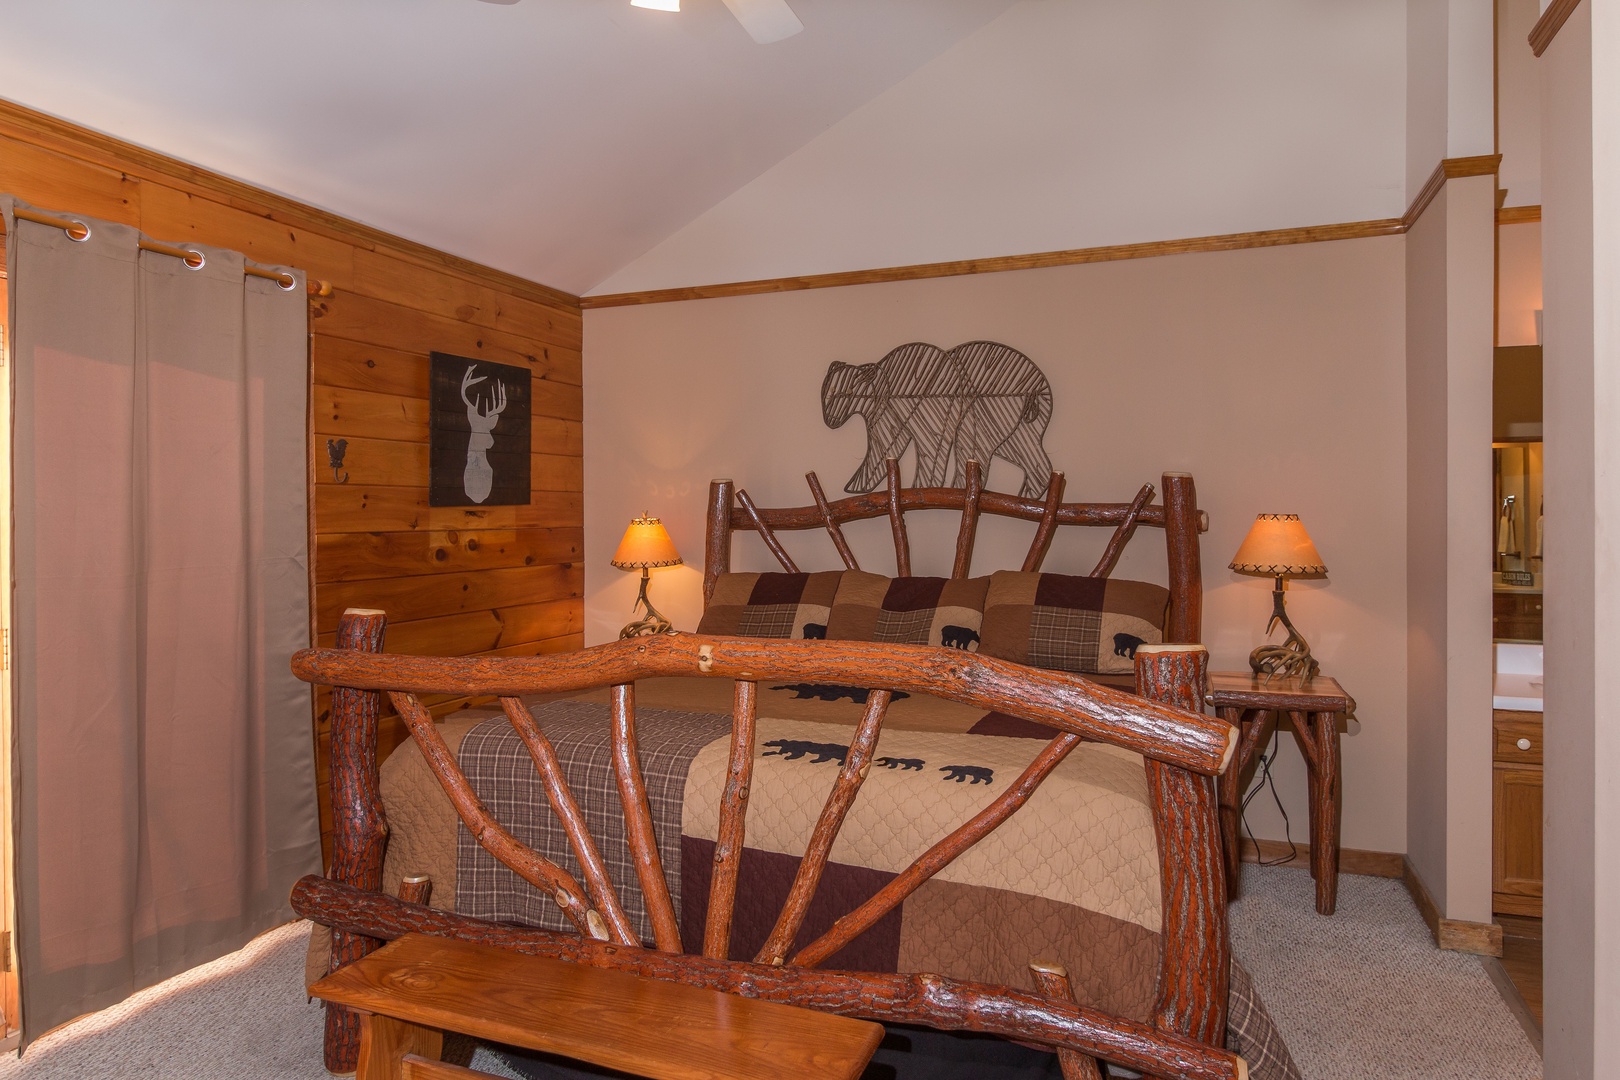 Bedroom with a log bed, night stands, and lamps at Just for Fun, a 4 bedroom cabin rental located in Pigeon Forge